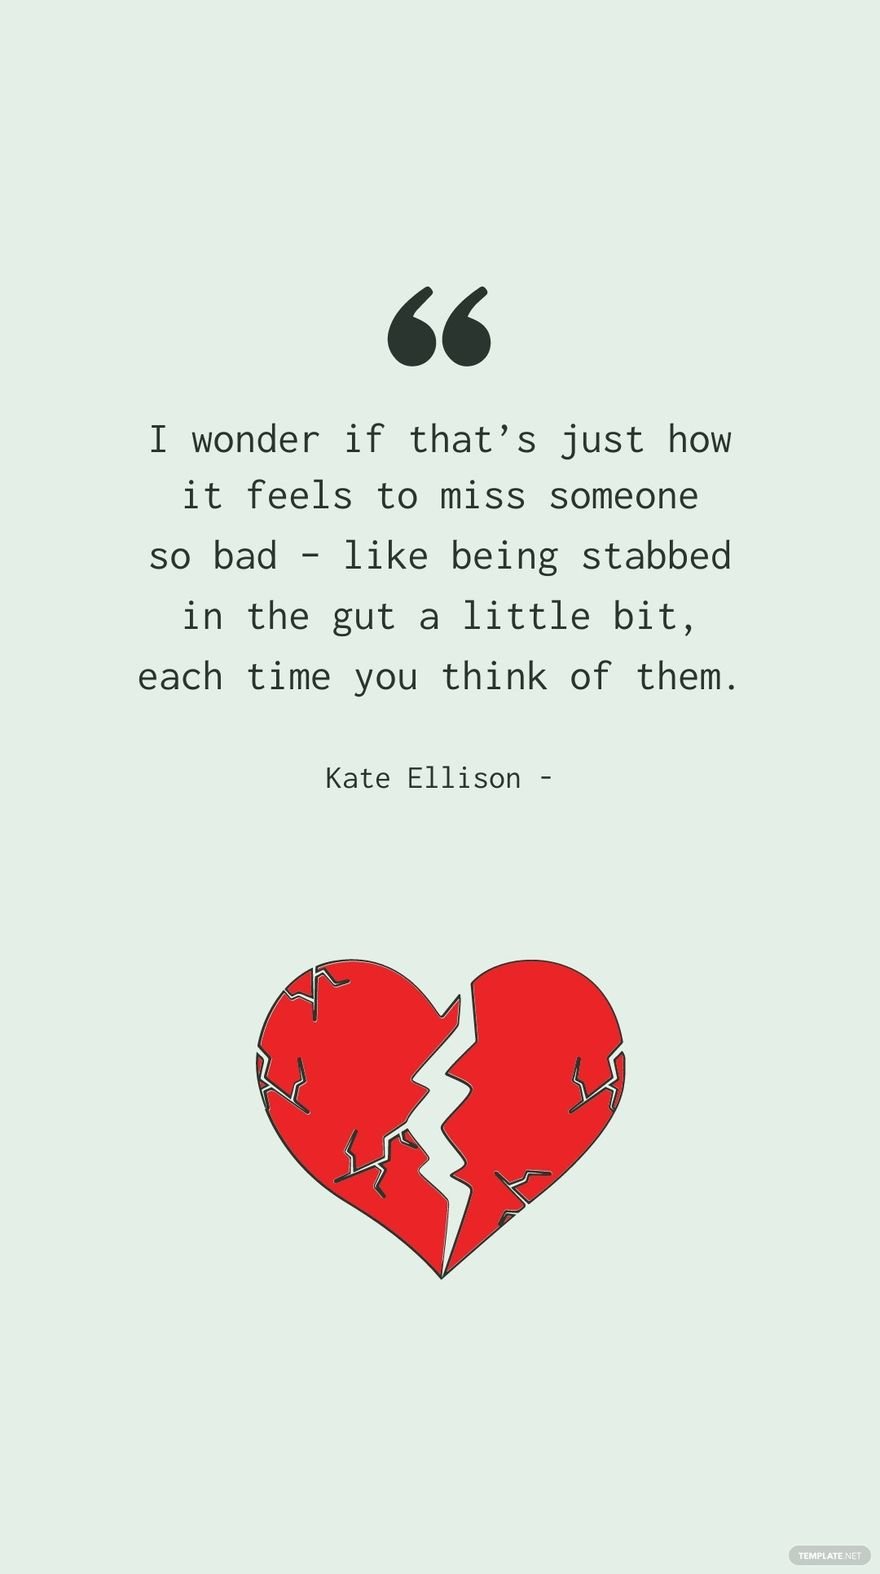 Free Kate Ellison - I wonder if that’s just how it feels to miss someone so bad – like being stabbed in the gut a little bit, each time you think of them.